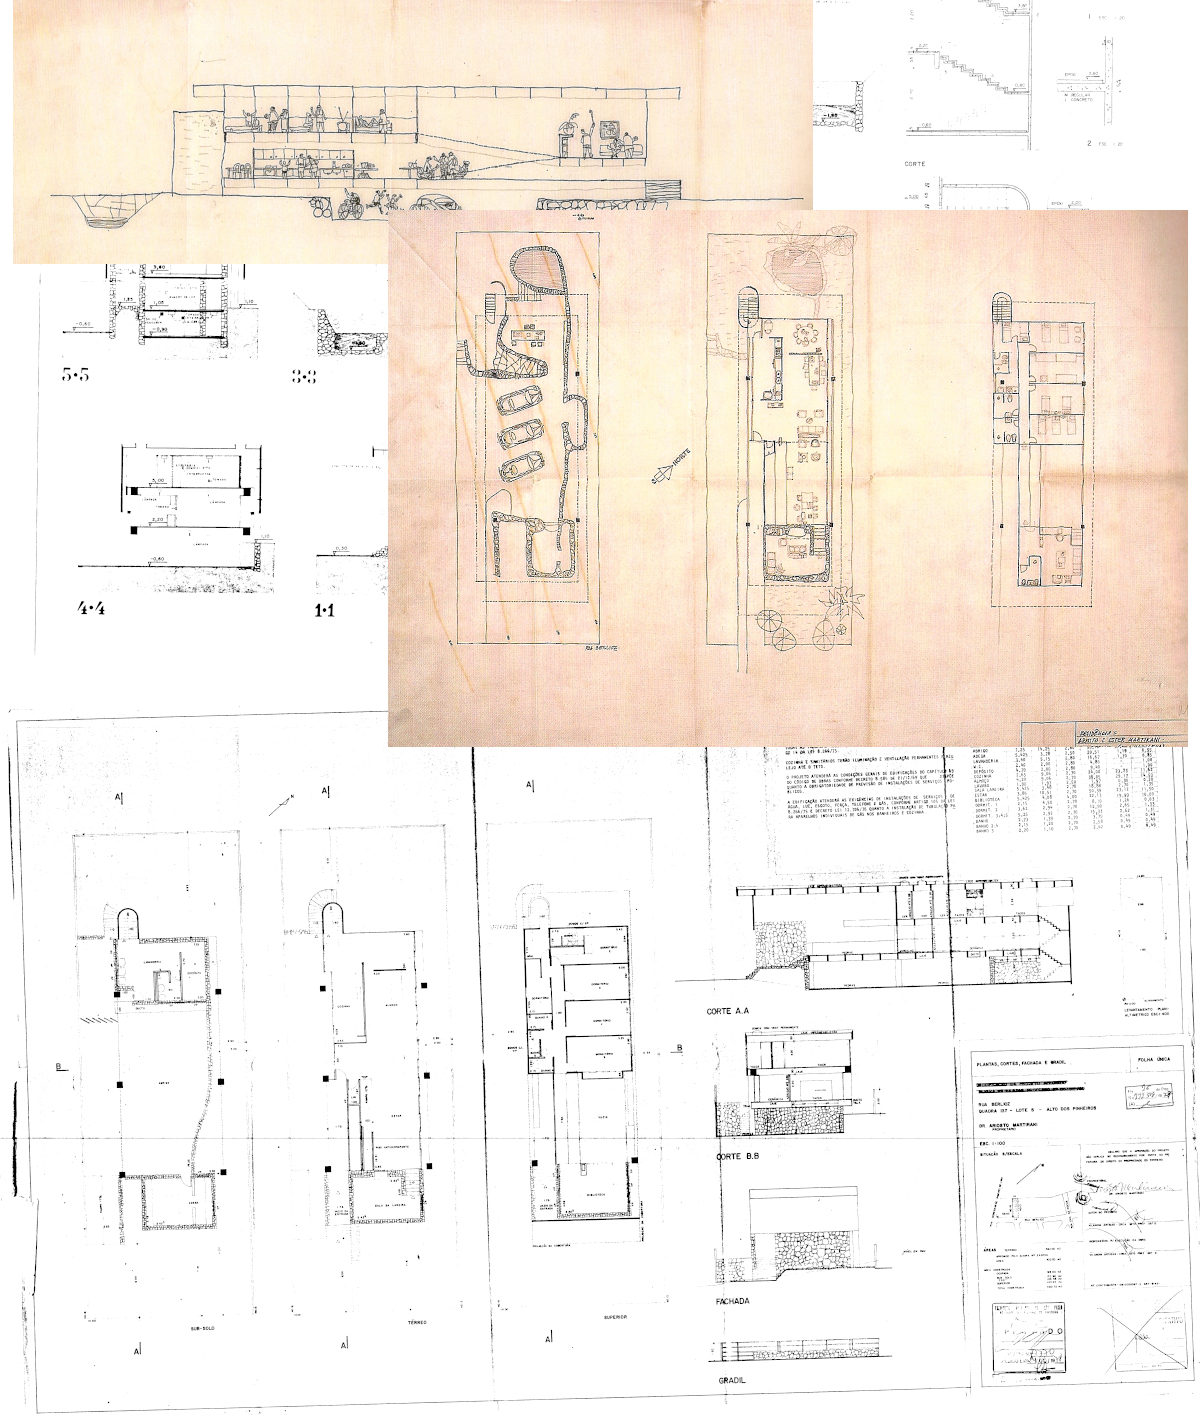 collage of Artigas's drawings